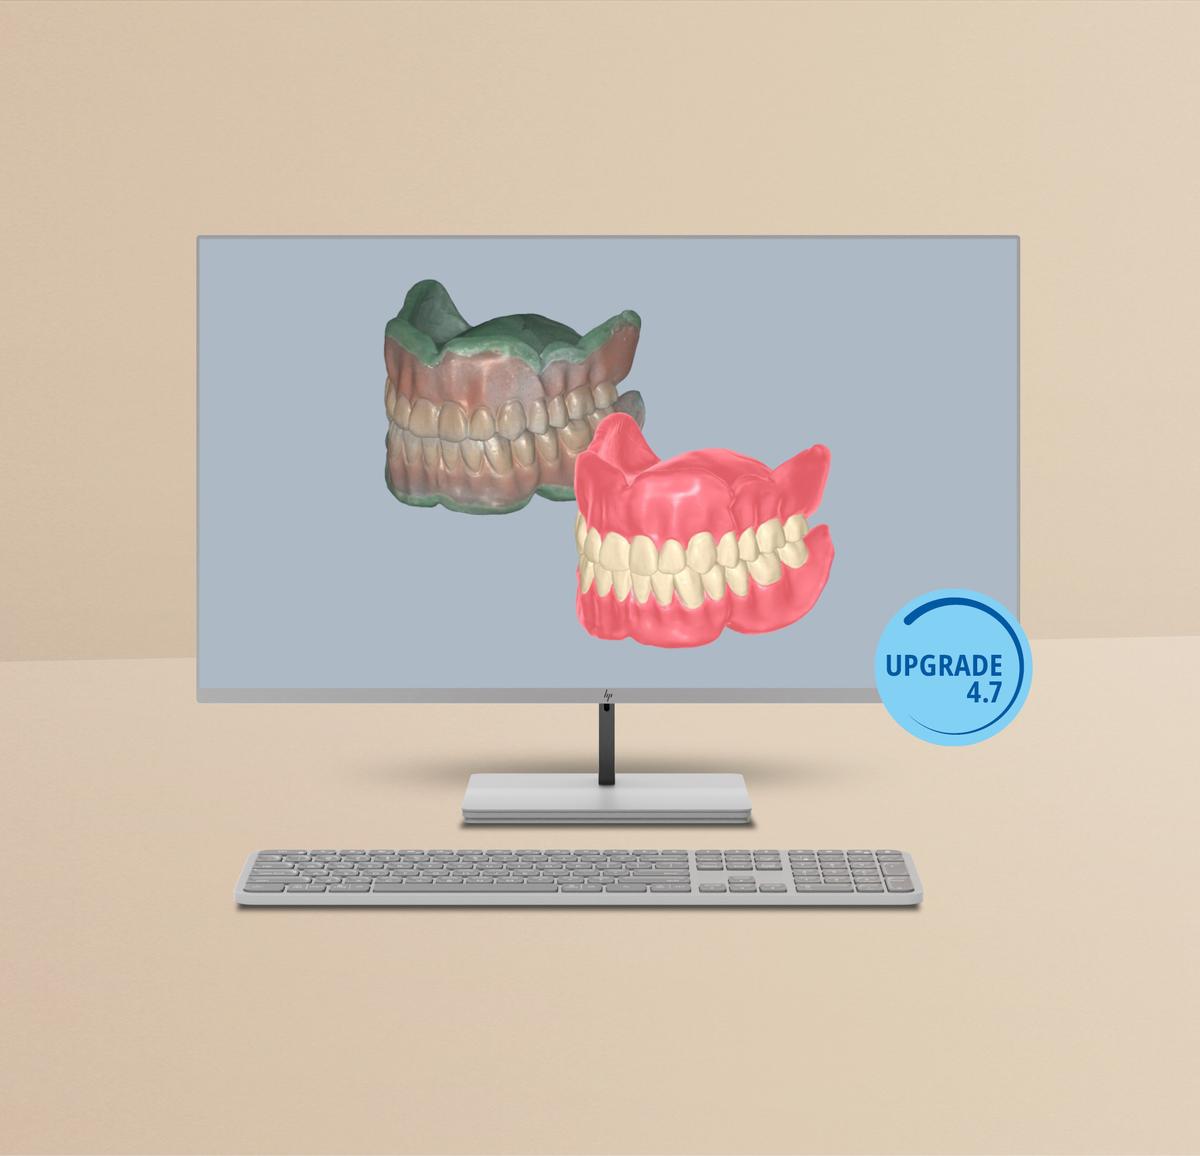 Up-to-date with the latest Ceramill Software Upgrade